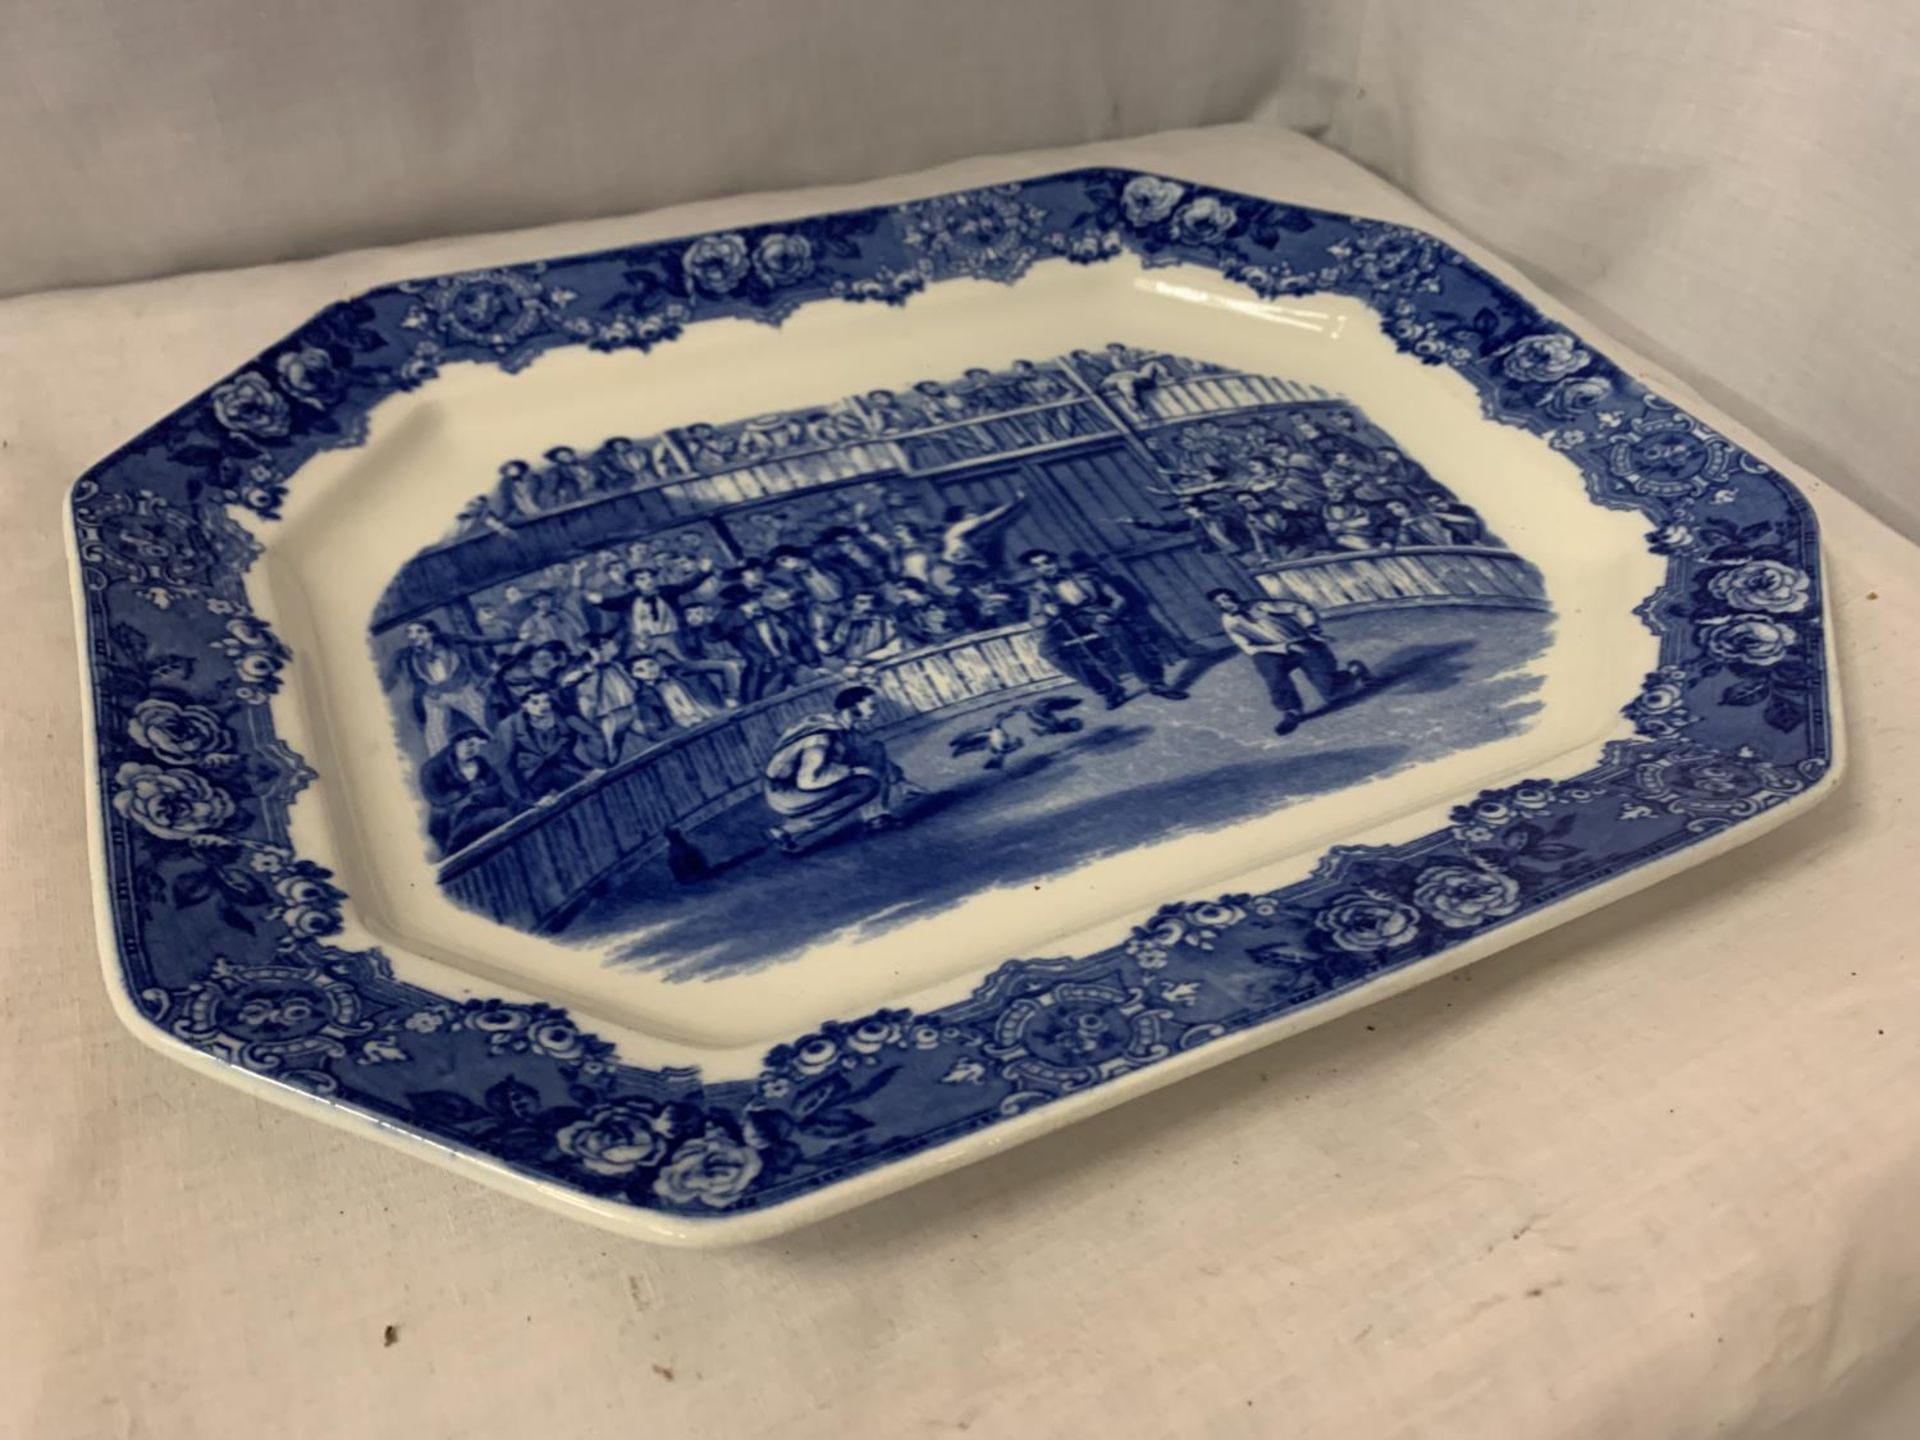 A LARGE BLUE AND WHITE MEAT PLATTER DEPICTING COCK FIGHTING AND STAMPED SPANISH FESTIVITIES 1798 - Image 5 of 5